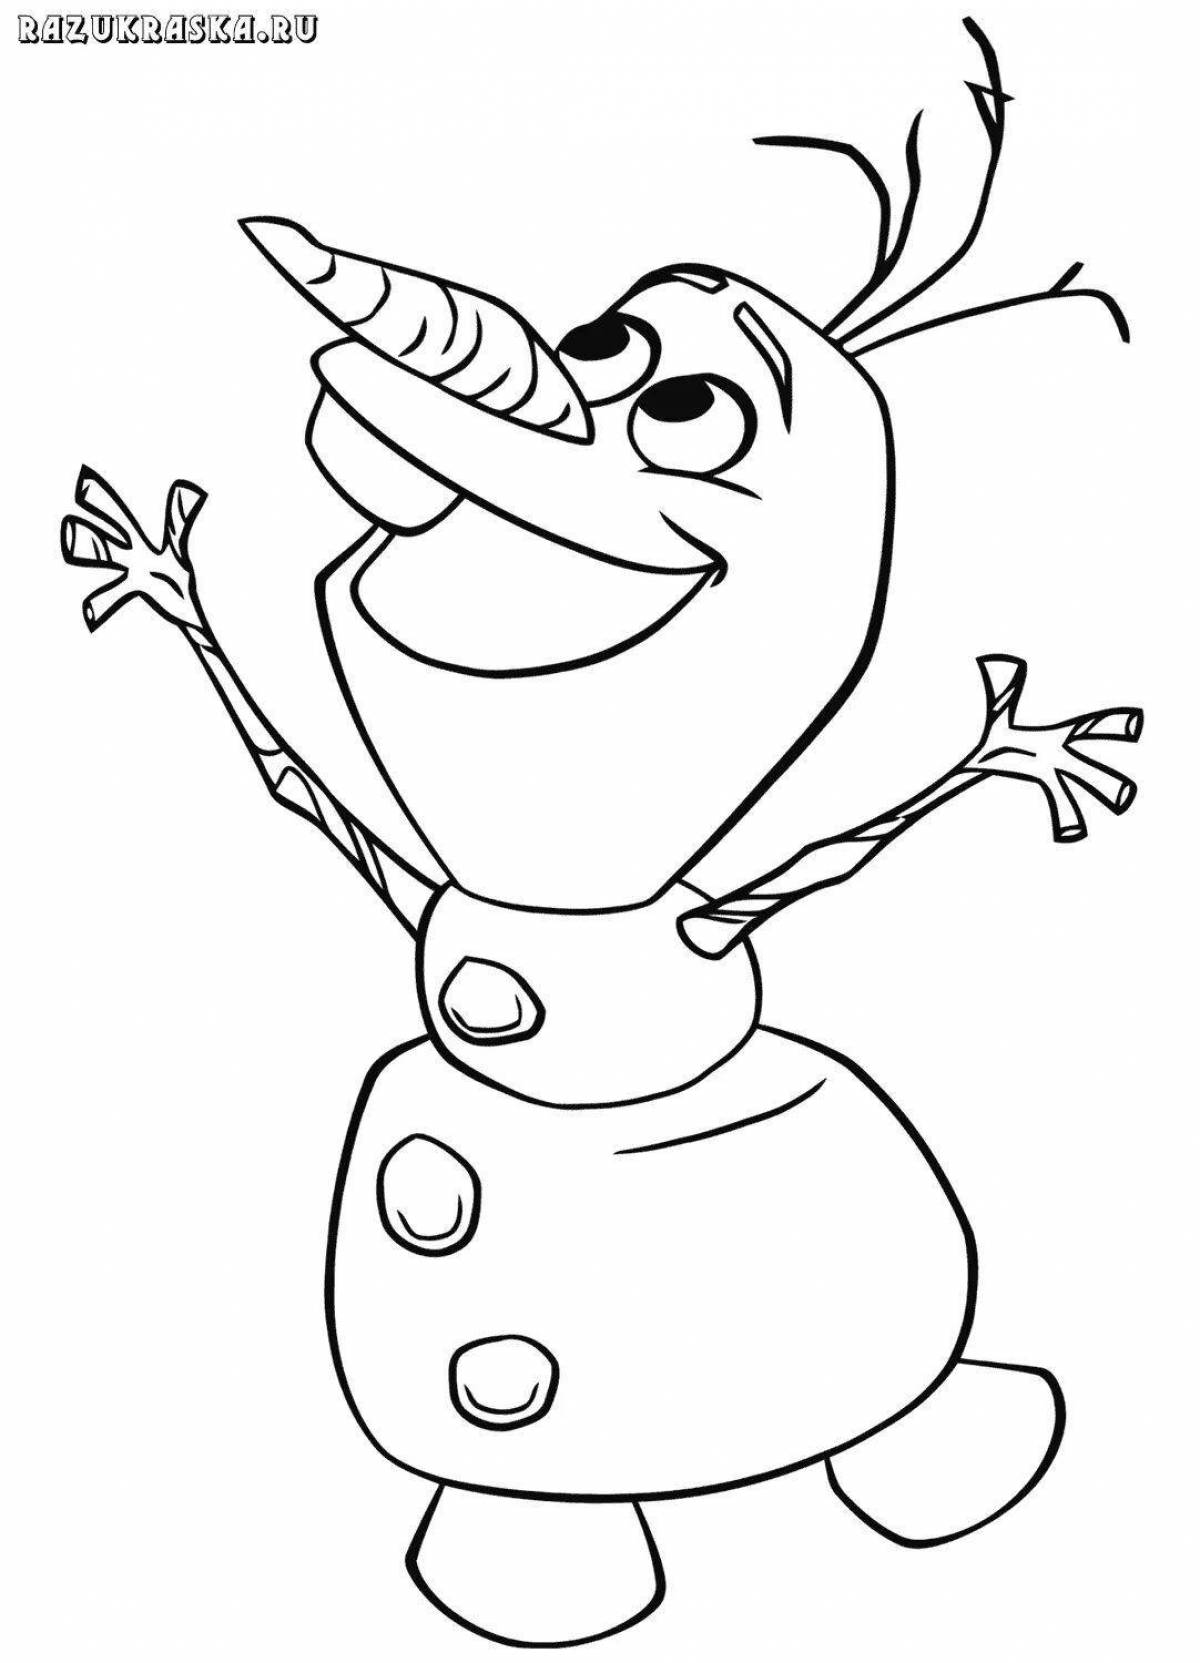 Olaf's adorable coloring book for kids